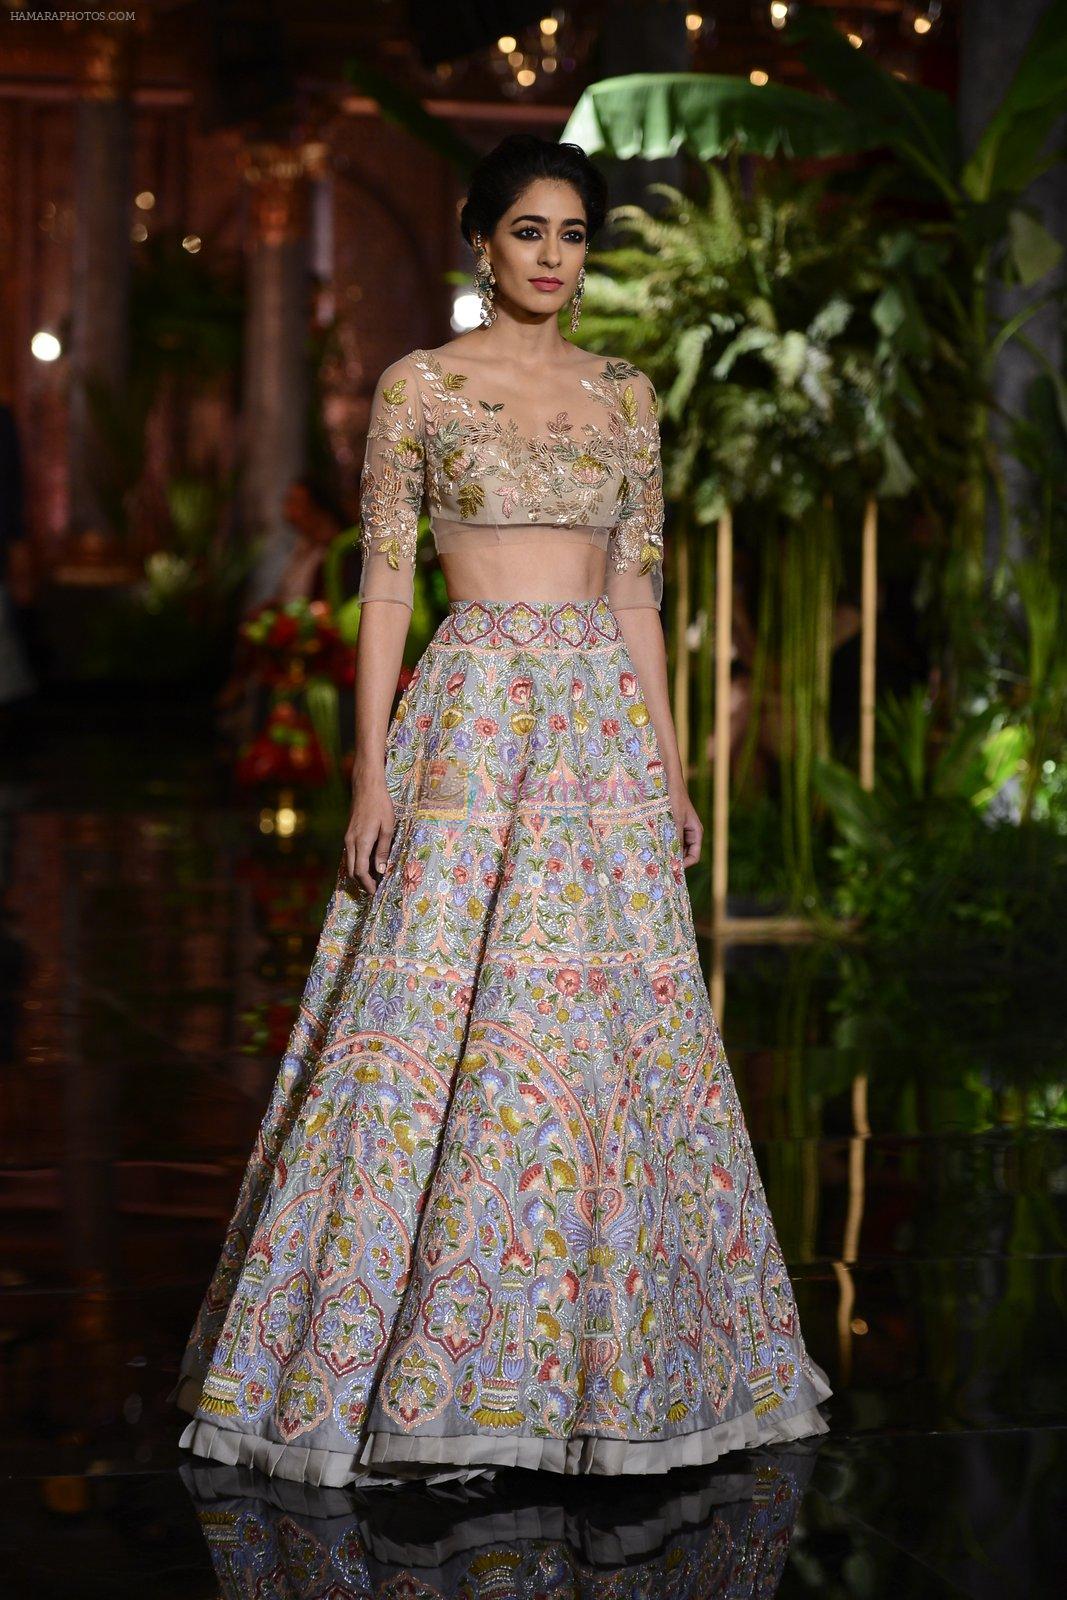 during the FDCI India Couture Week 2016 at the Taj Palace on July 21, 2016